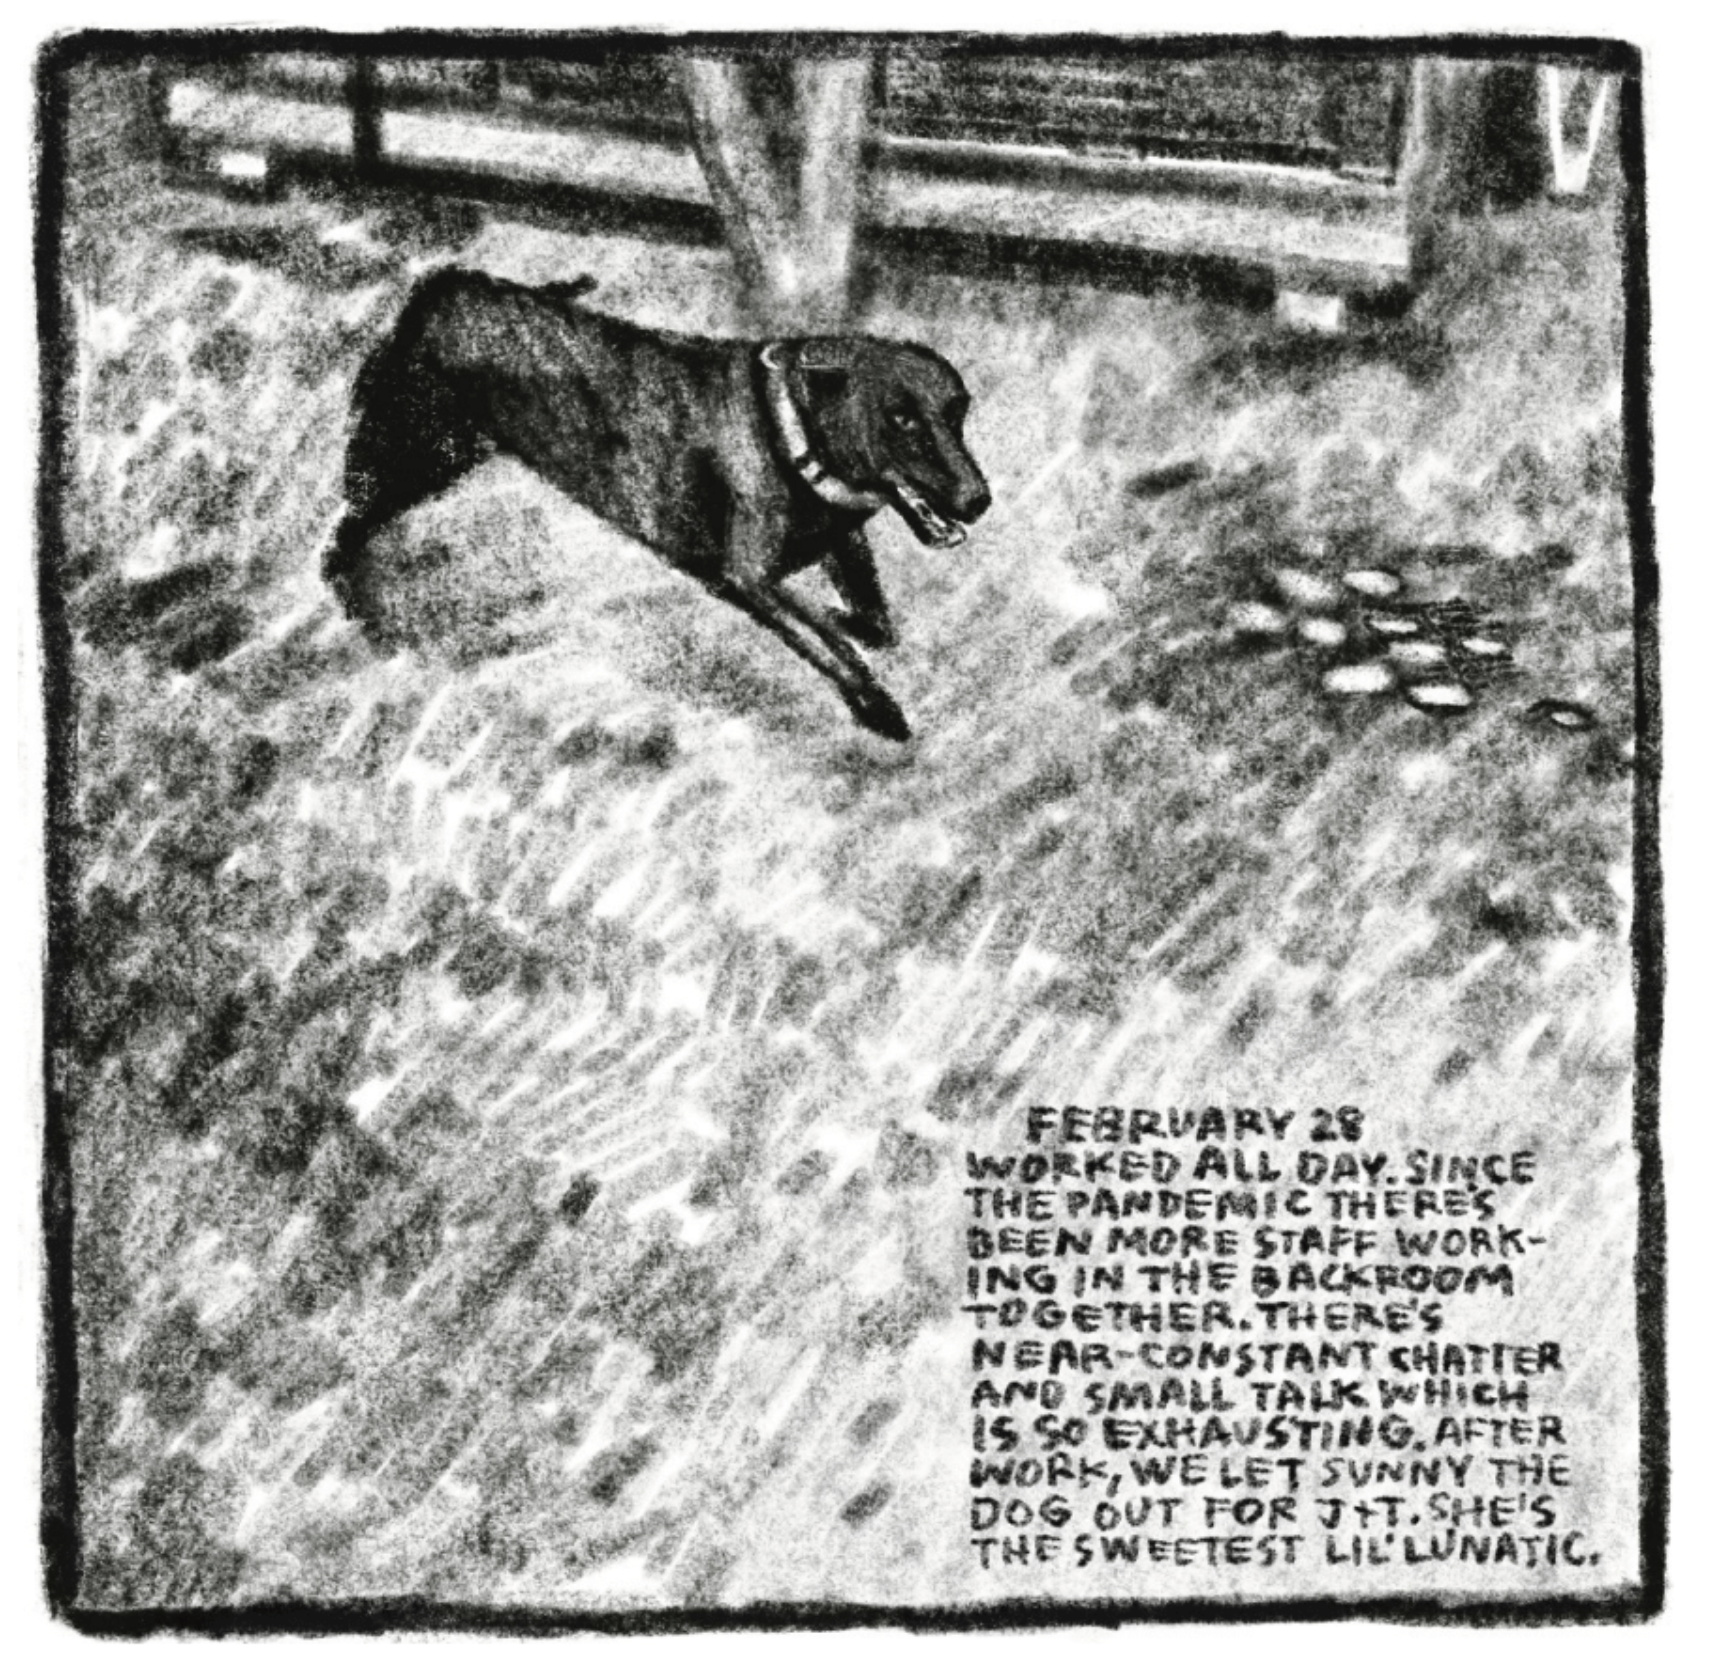 Hold Still Episode 10, panel 5
Drawing of a smiling dog prancing through a yard.
Lower right corner reads: "FEBRUARY 28
WORKED ALL DAY. SINCE THE PANDEMIC THERE'S BEEN MORE STAFF WORKING IN THE BACKROOM TOGETHER. THERE'S NEAR-CONSTANT CHATTER AND SMALL TALK WHICH IS SO EXHAUSTING. AFTER WORK, WE LET SUNNY THE DOG OUT FOR J+T. SHE'S THE SWEETEST LIL' LUNATIC."